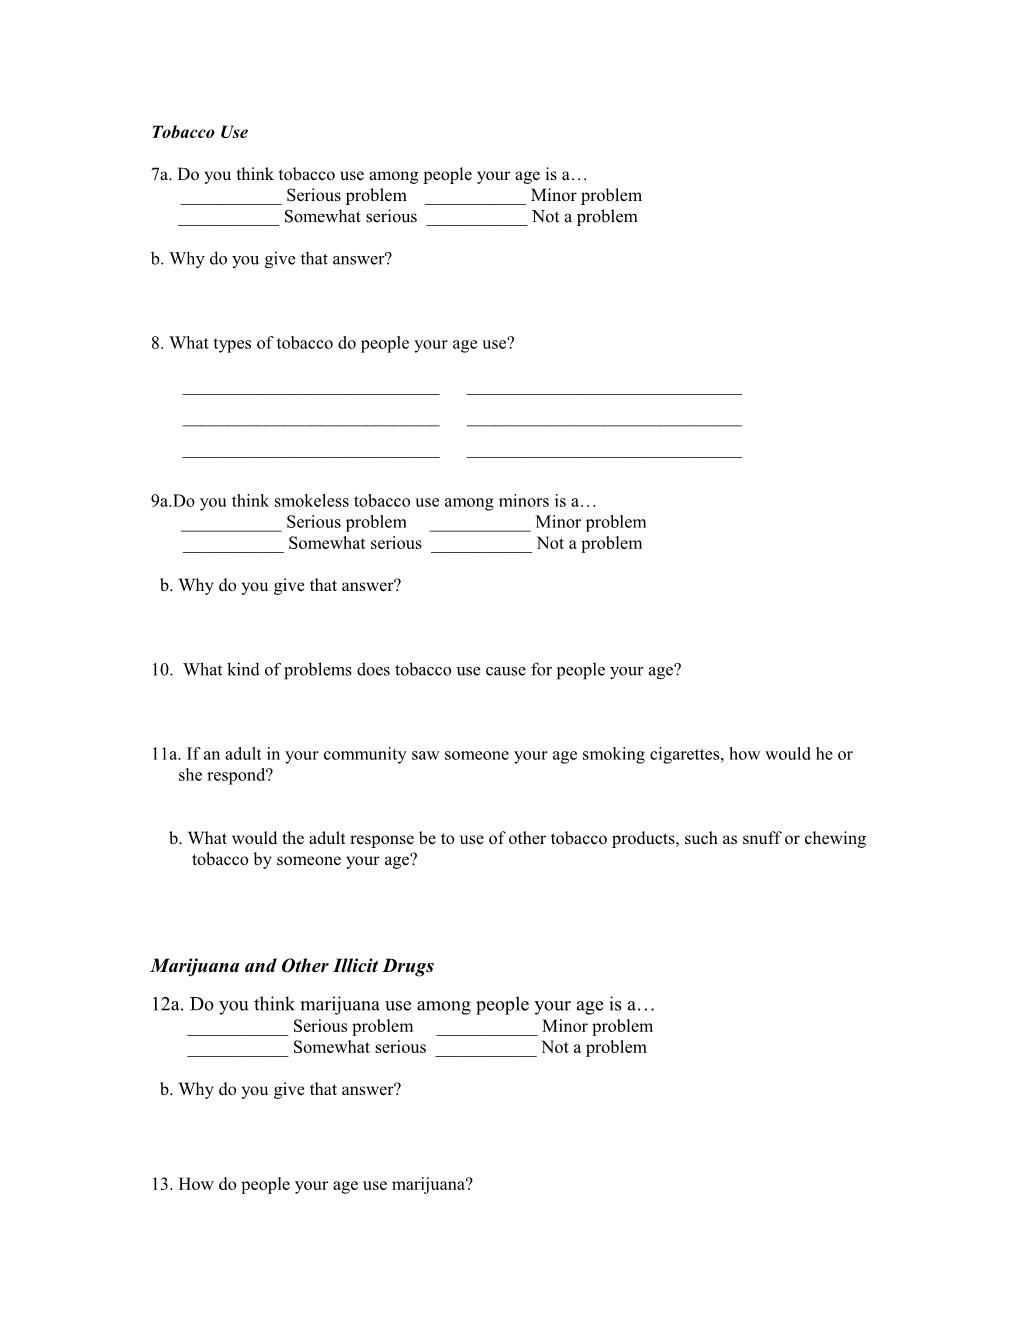 Youth Questionnaire on Substance Use